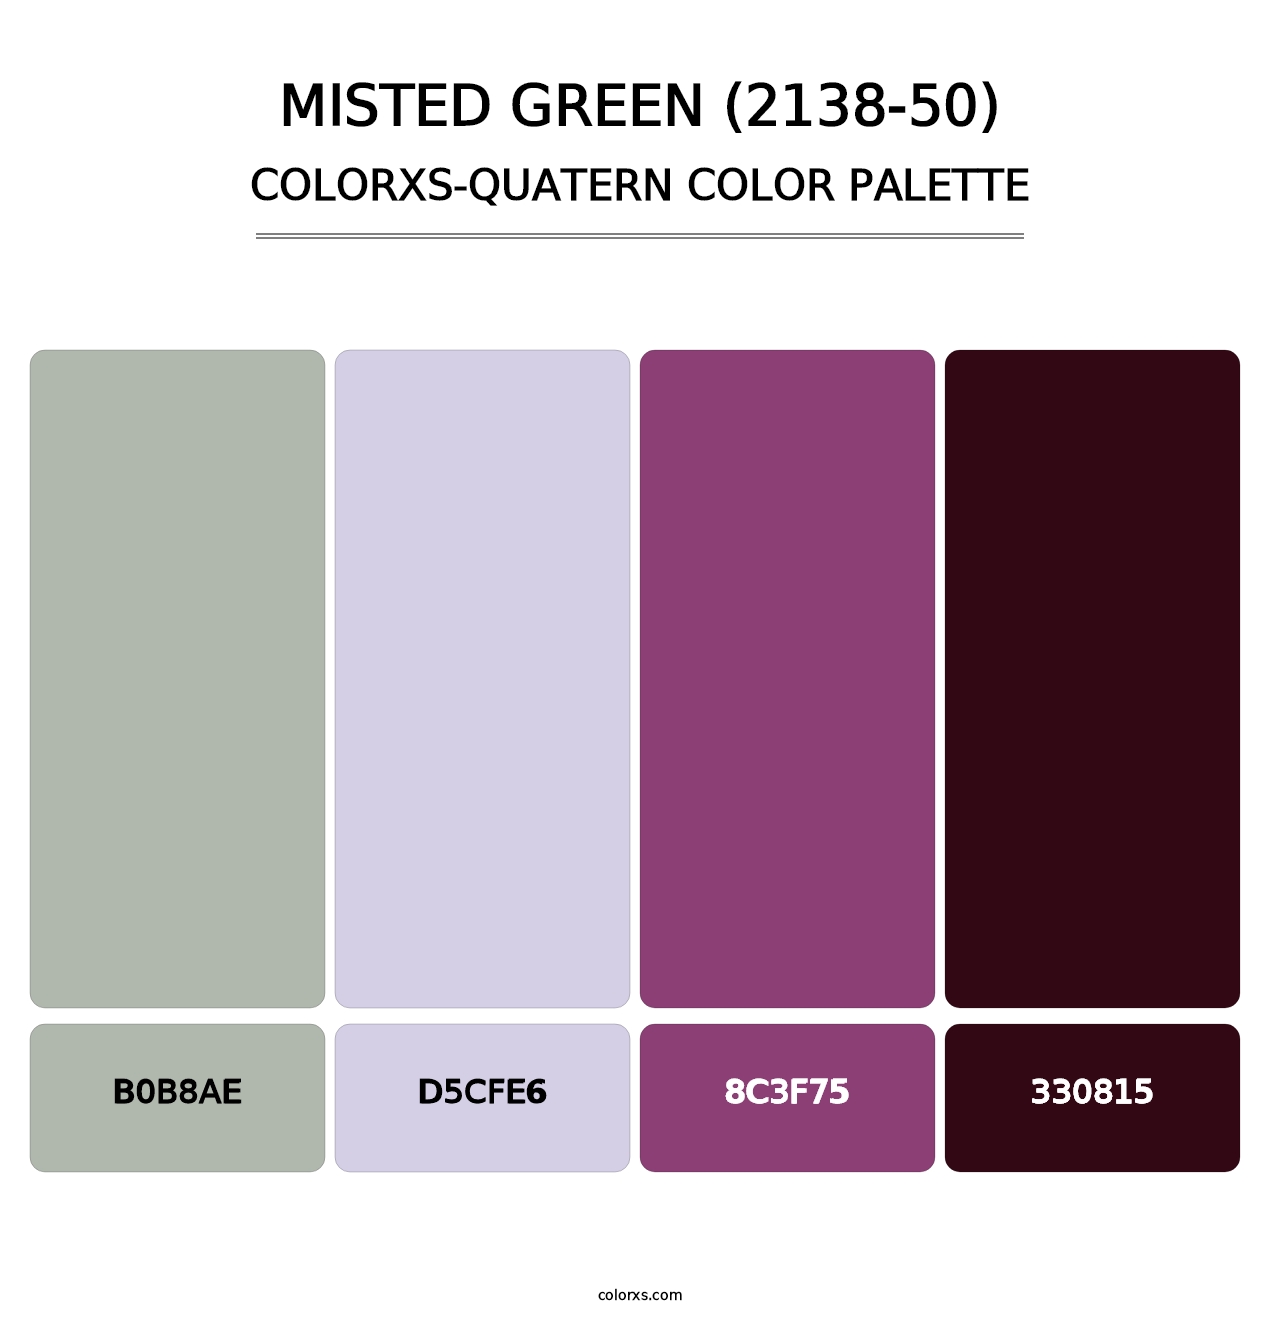 Misted Green (2138-50) - Colorxs Quatern Palette